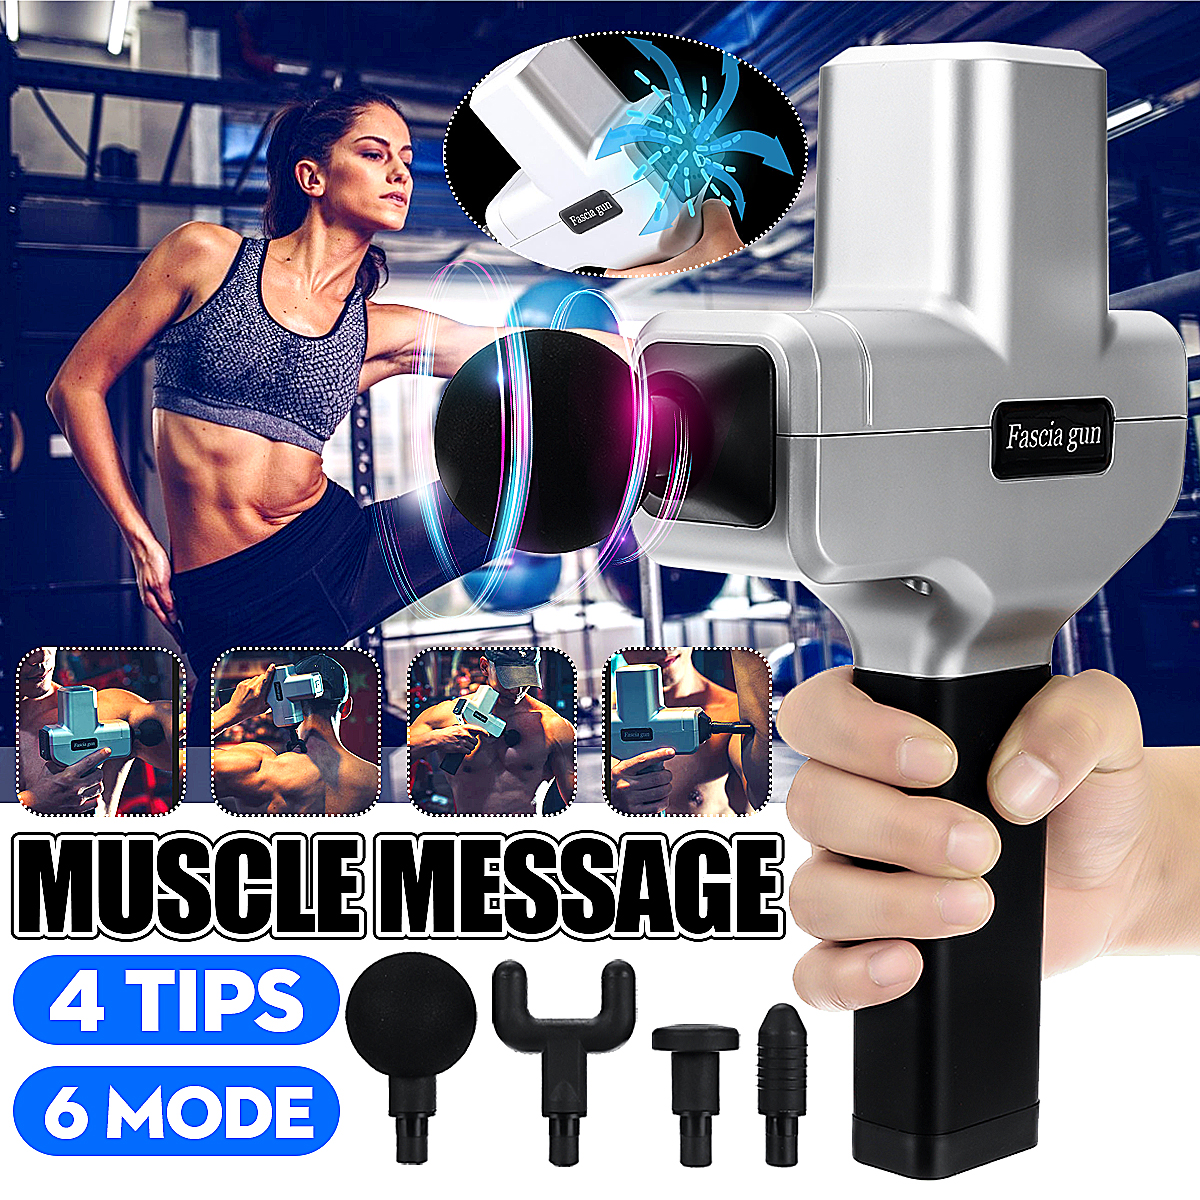 2400RMM-Rechargeable-Professional-Electric-Percussion-Massager-6-Modes-Muscle-Vibration-Massager-Exe-1616160-2